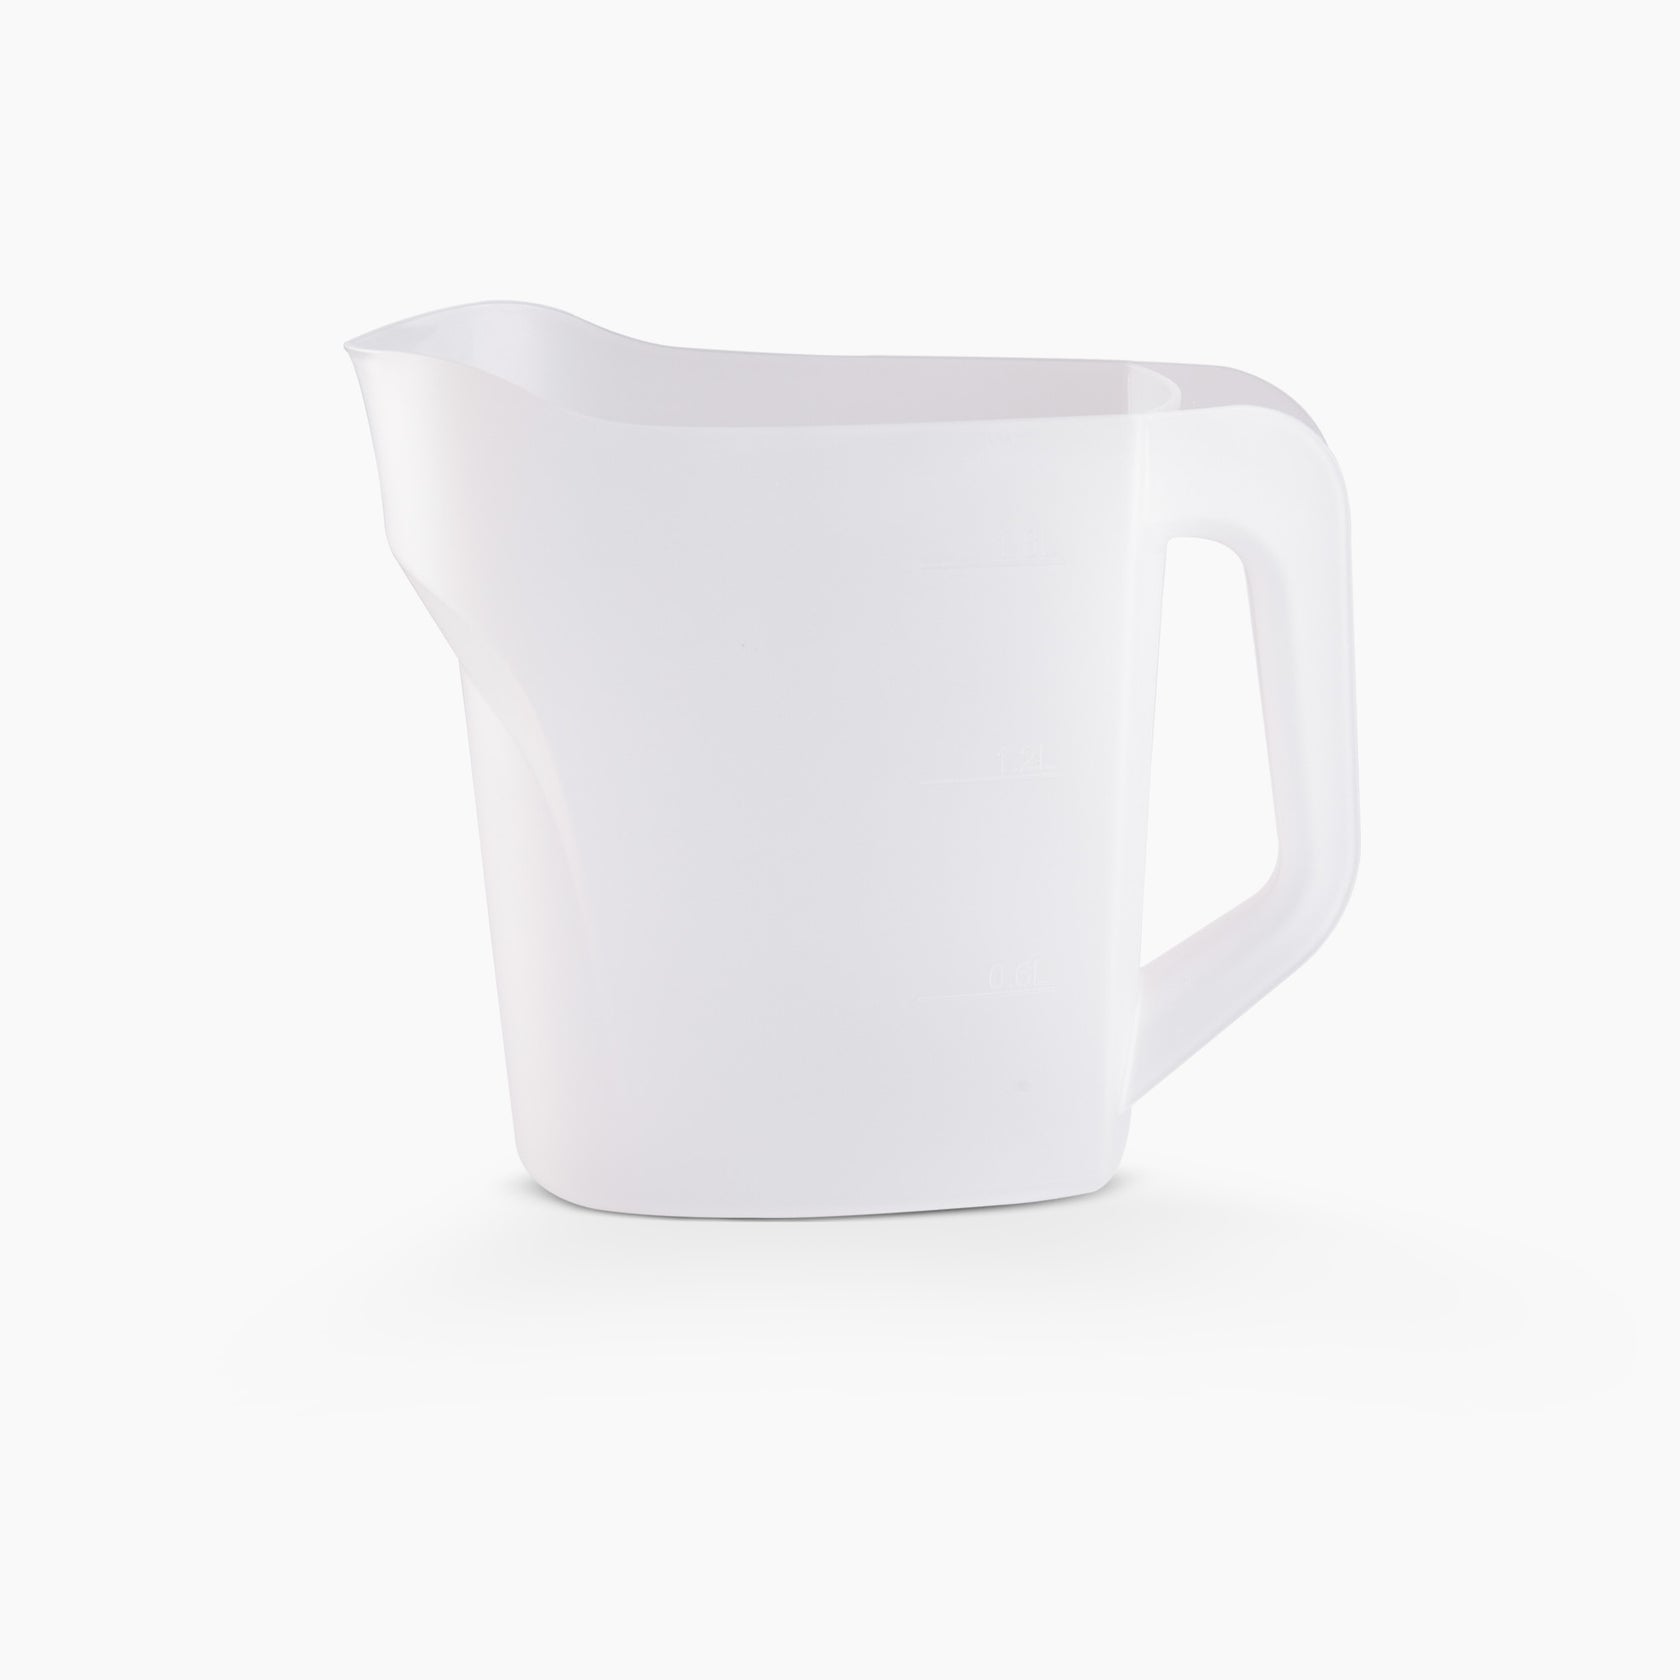 Pitcher for R01 Dishwasher